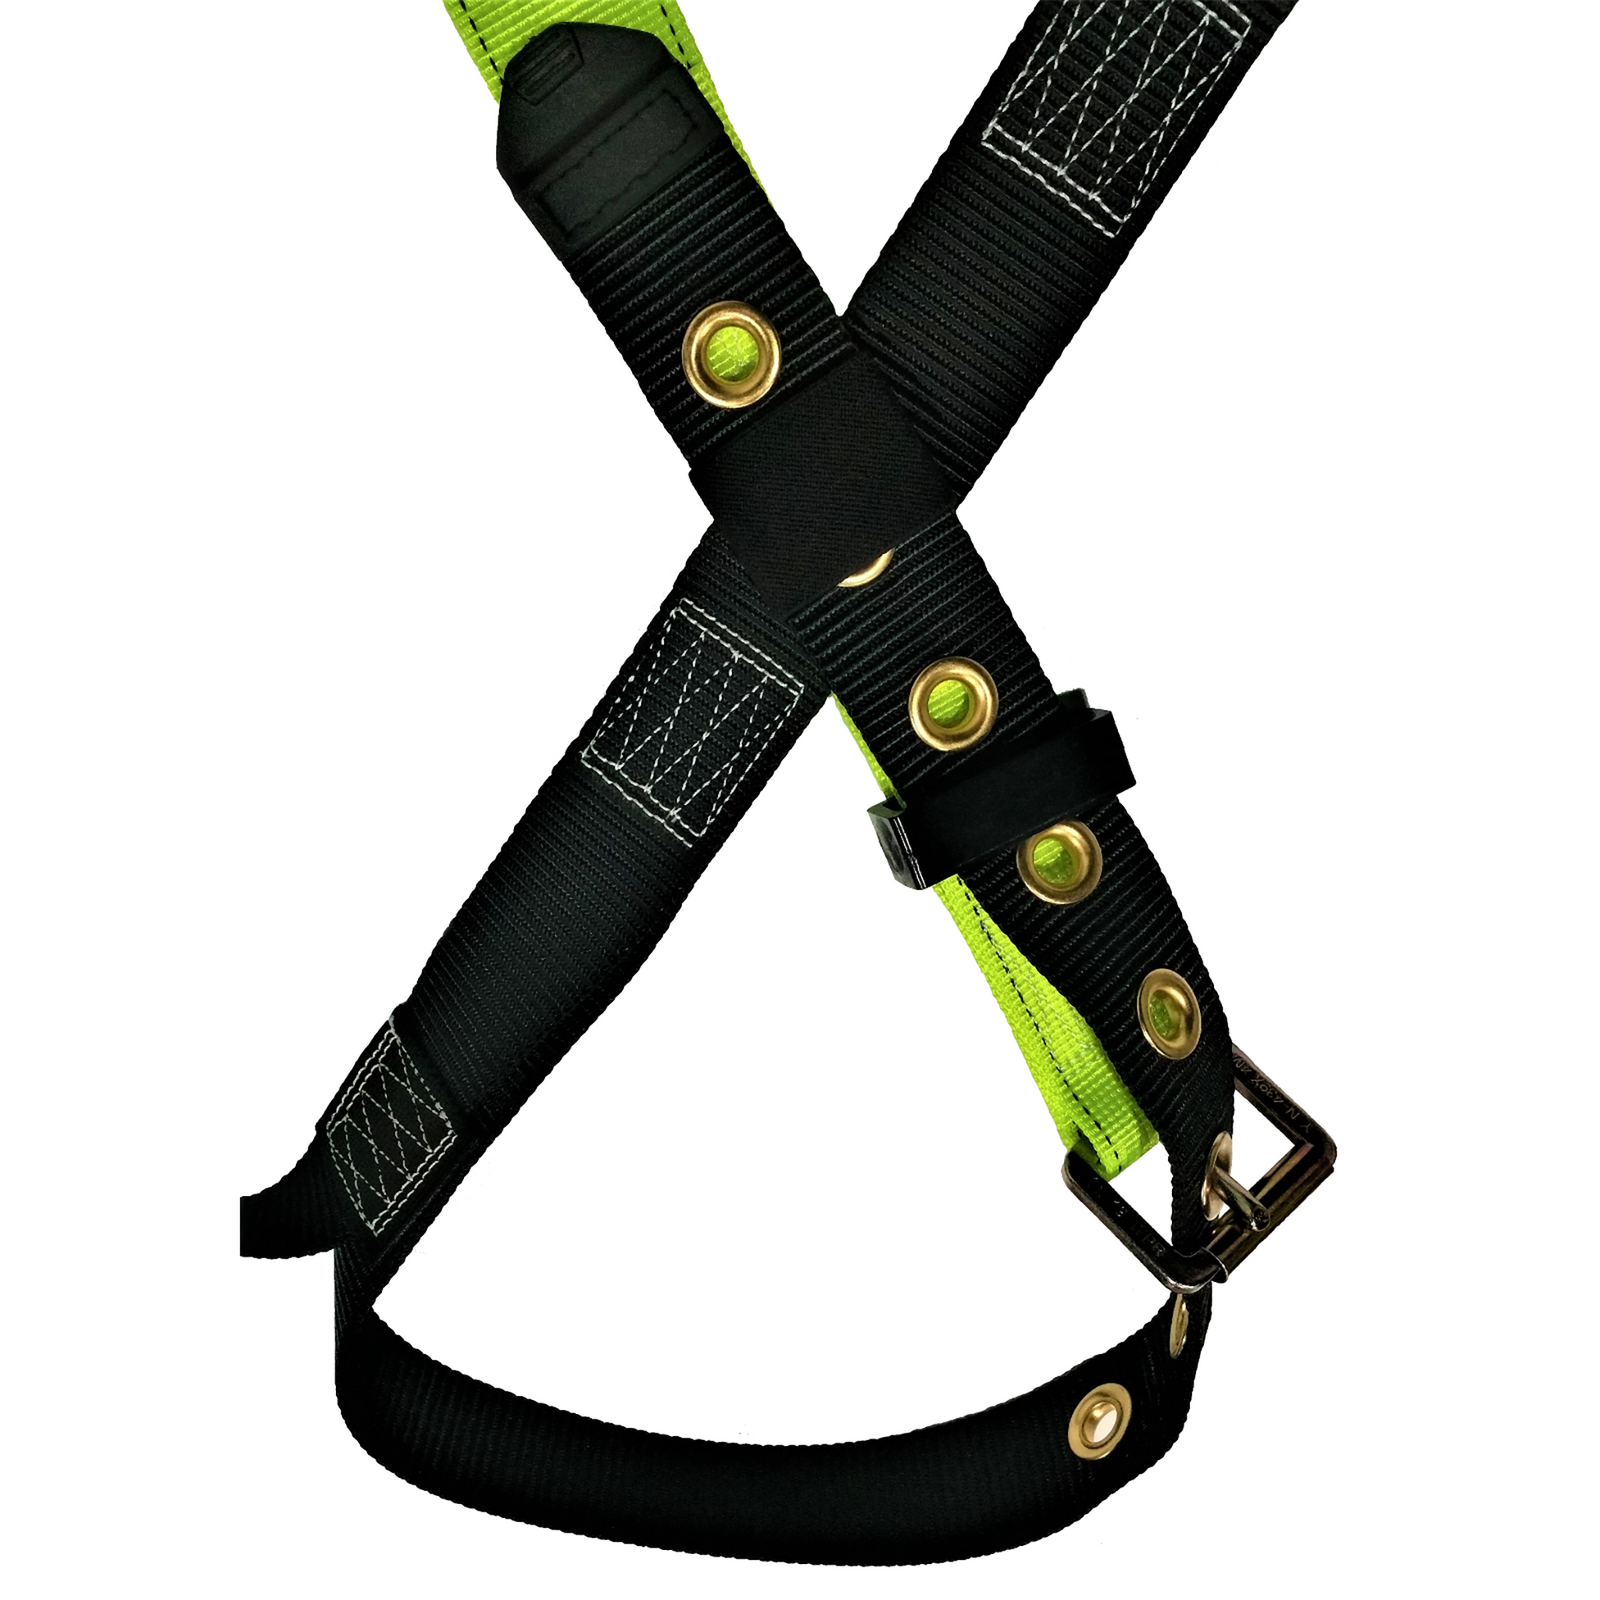 Show the 3D fall protection safety harness with grommets  and black strap with grommets